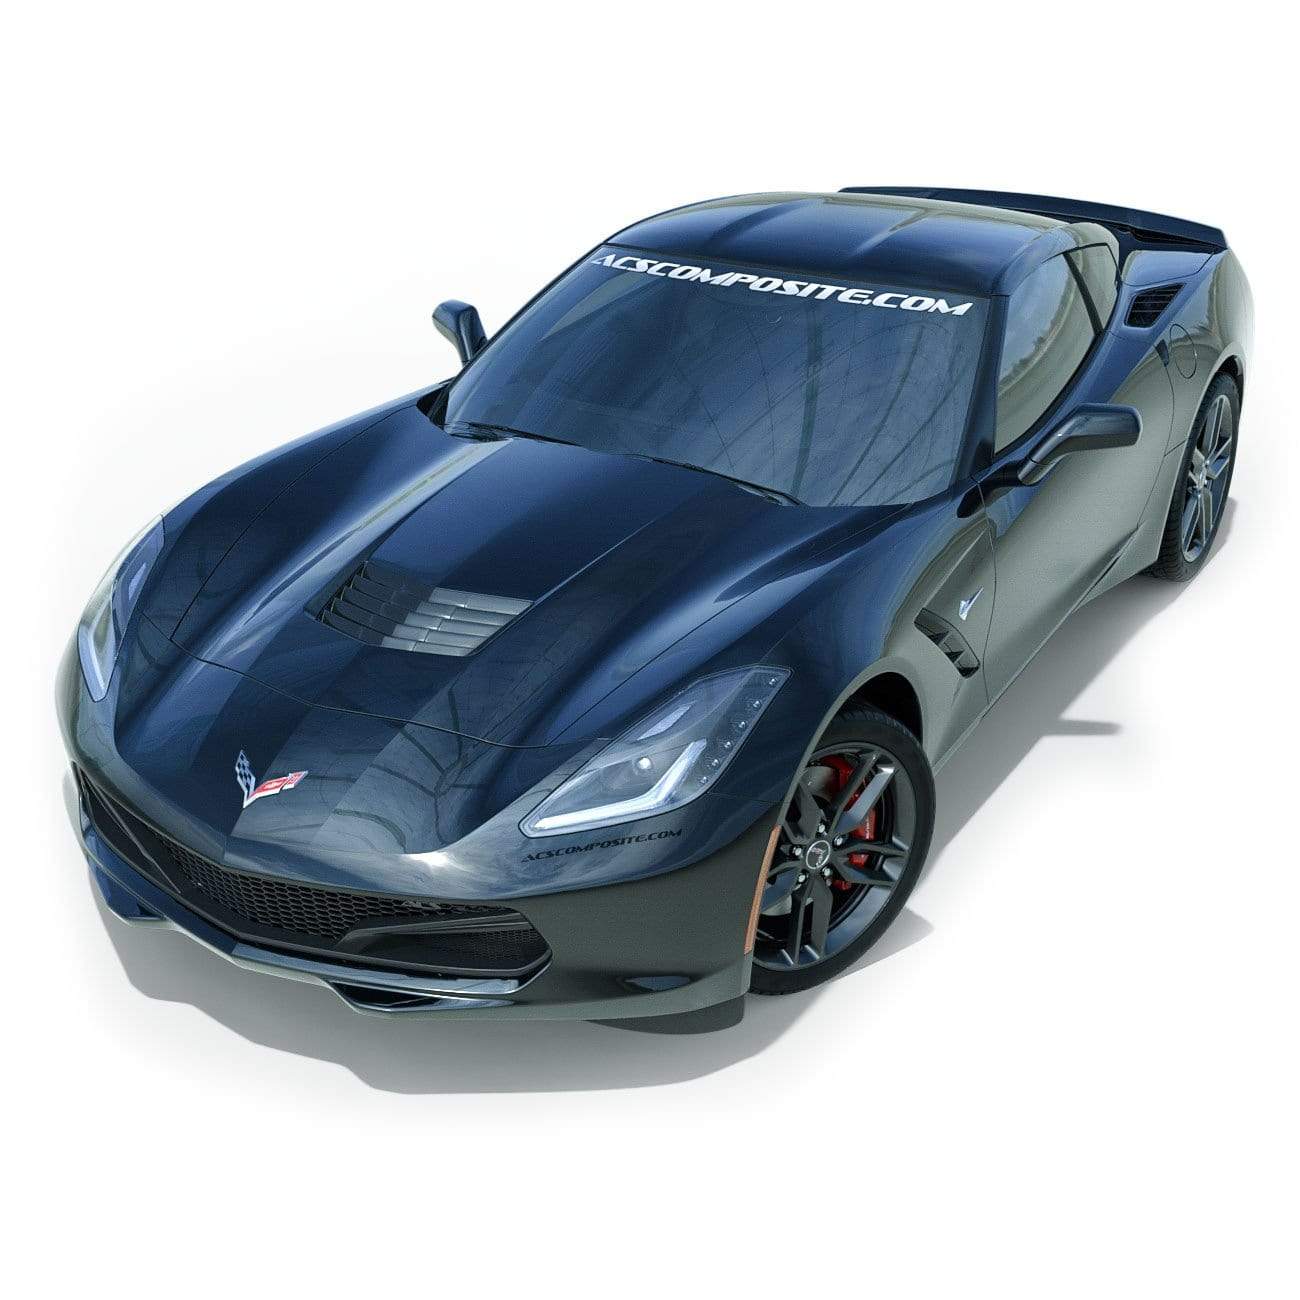 ACS Composite Five1 Front Bumper Grill for C7 Corvette [45-4-017]CFZ - Carbon Flash Black Painted Mesh Design with Improved Brake Cooling and Optional Camera Compatibility